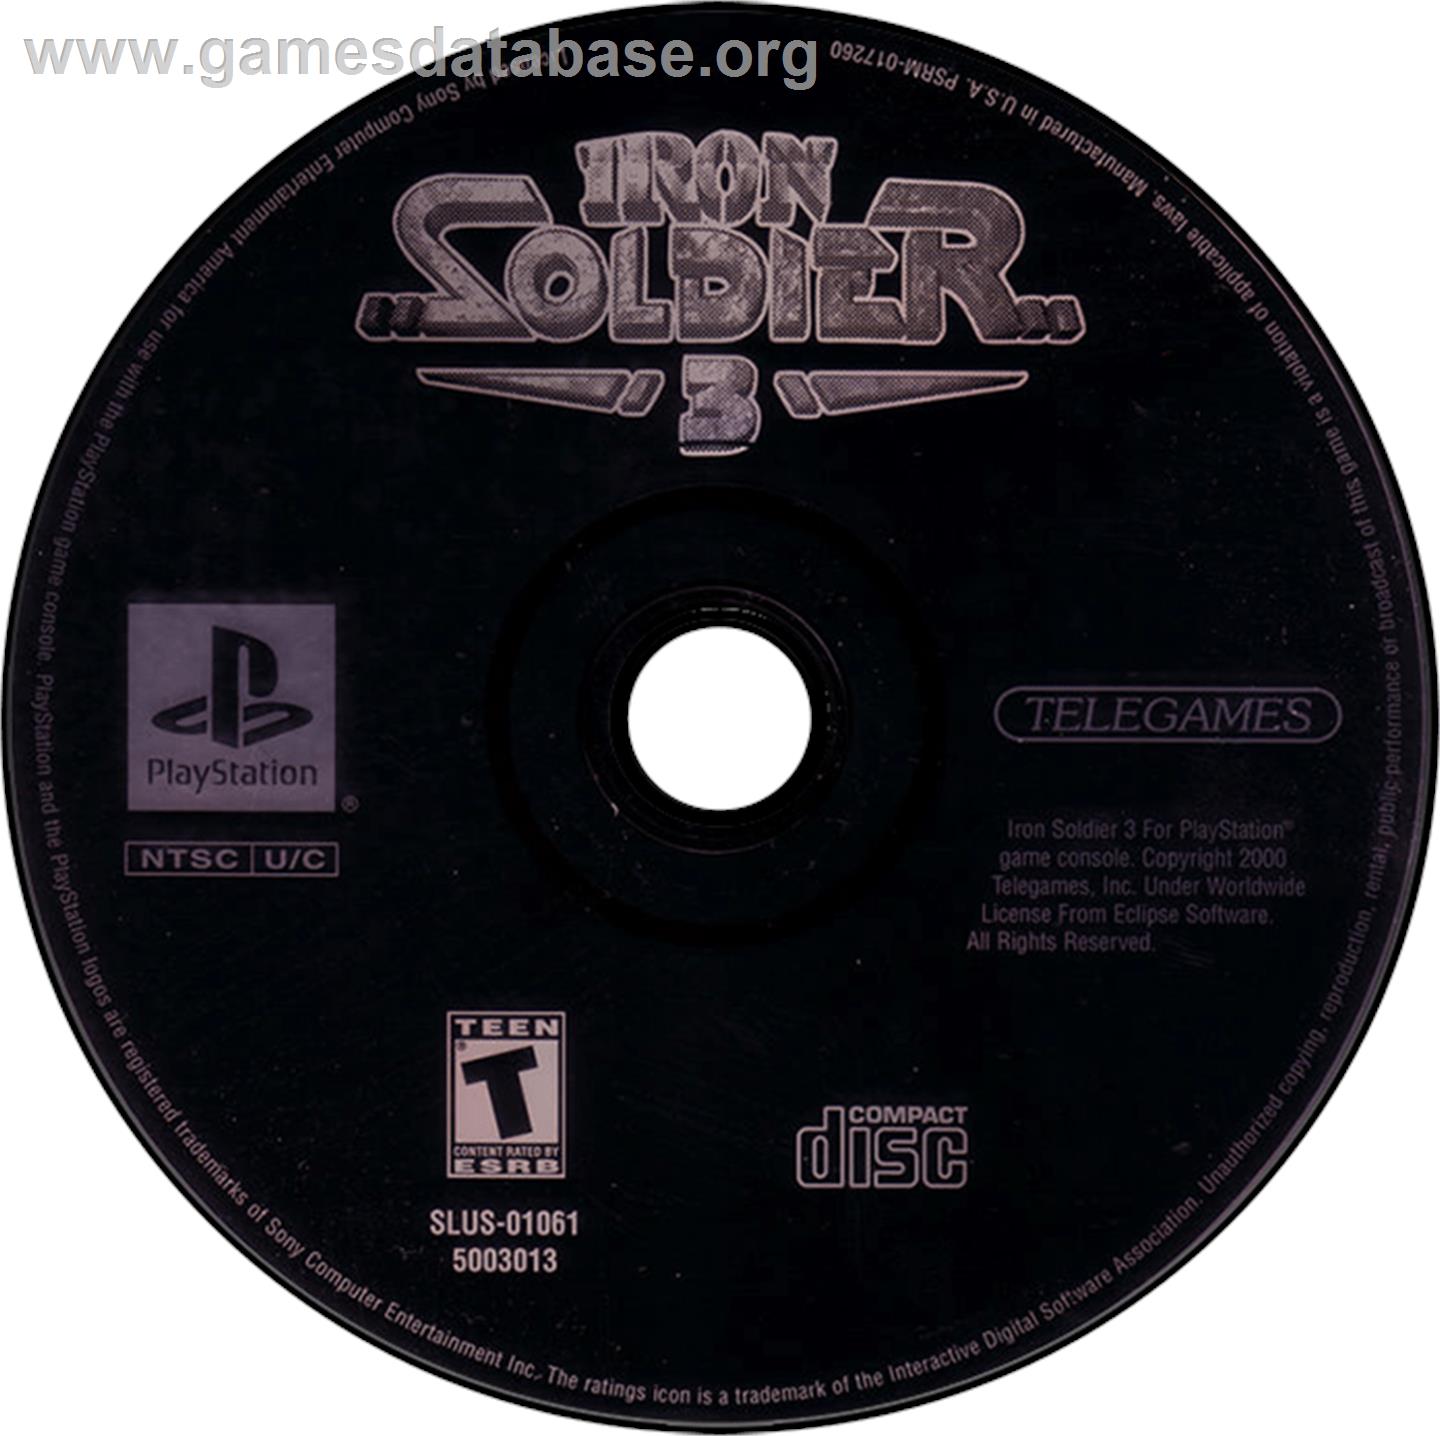 Iron Soldier 3 - Sony Playstation - Artwork - Disc